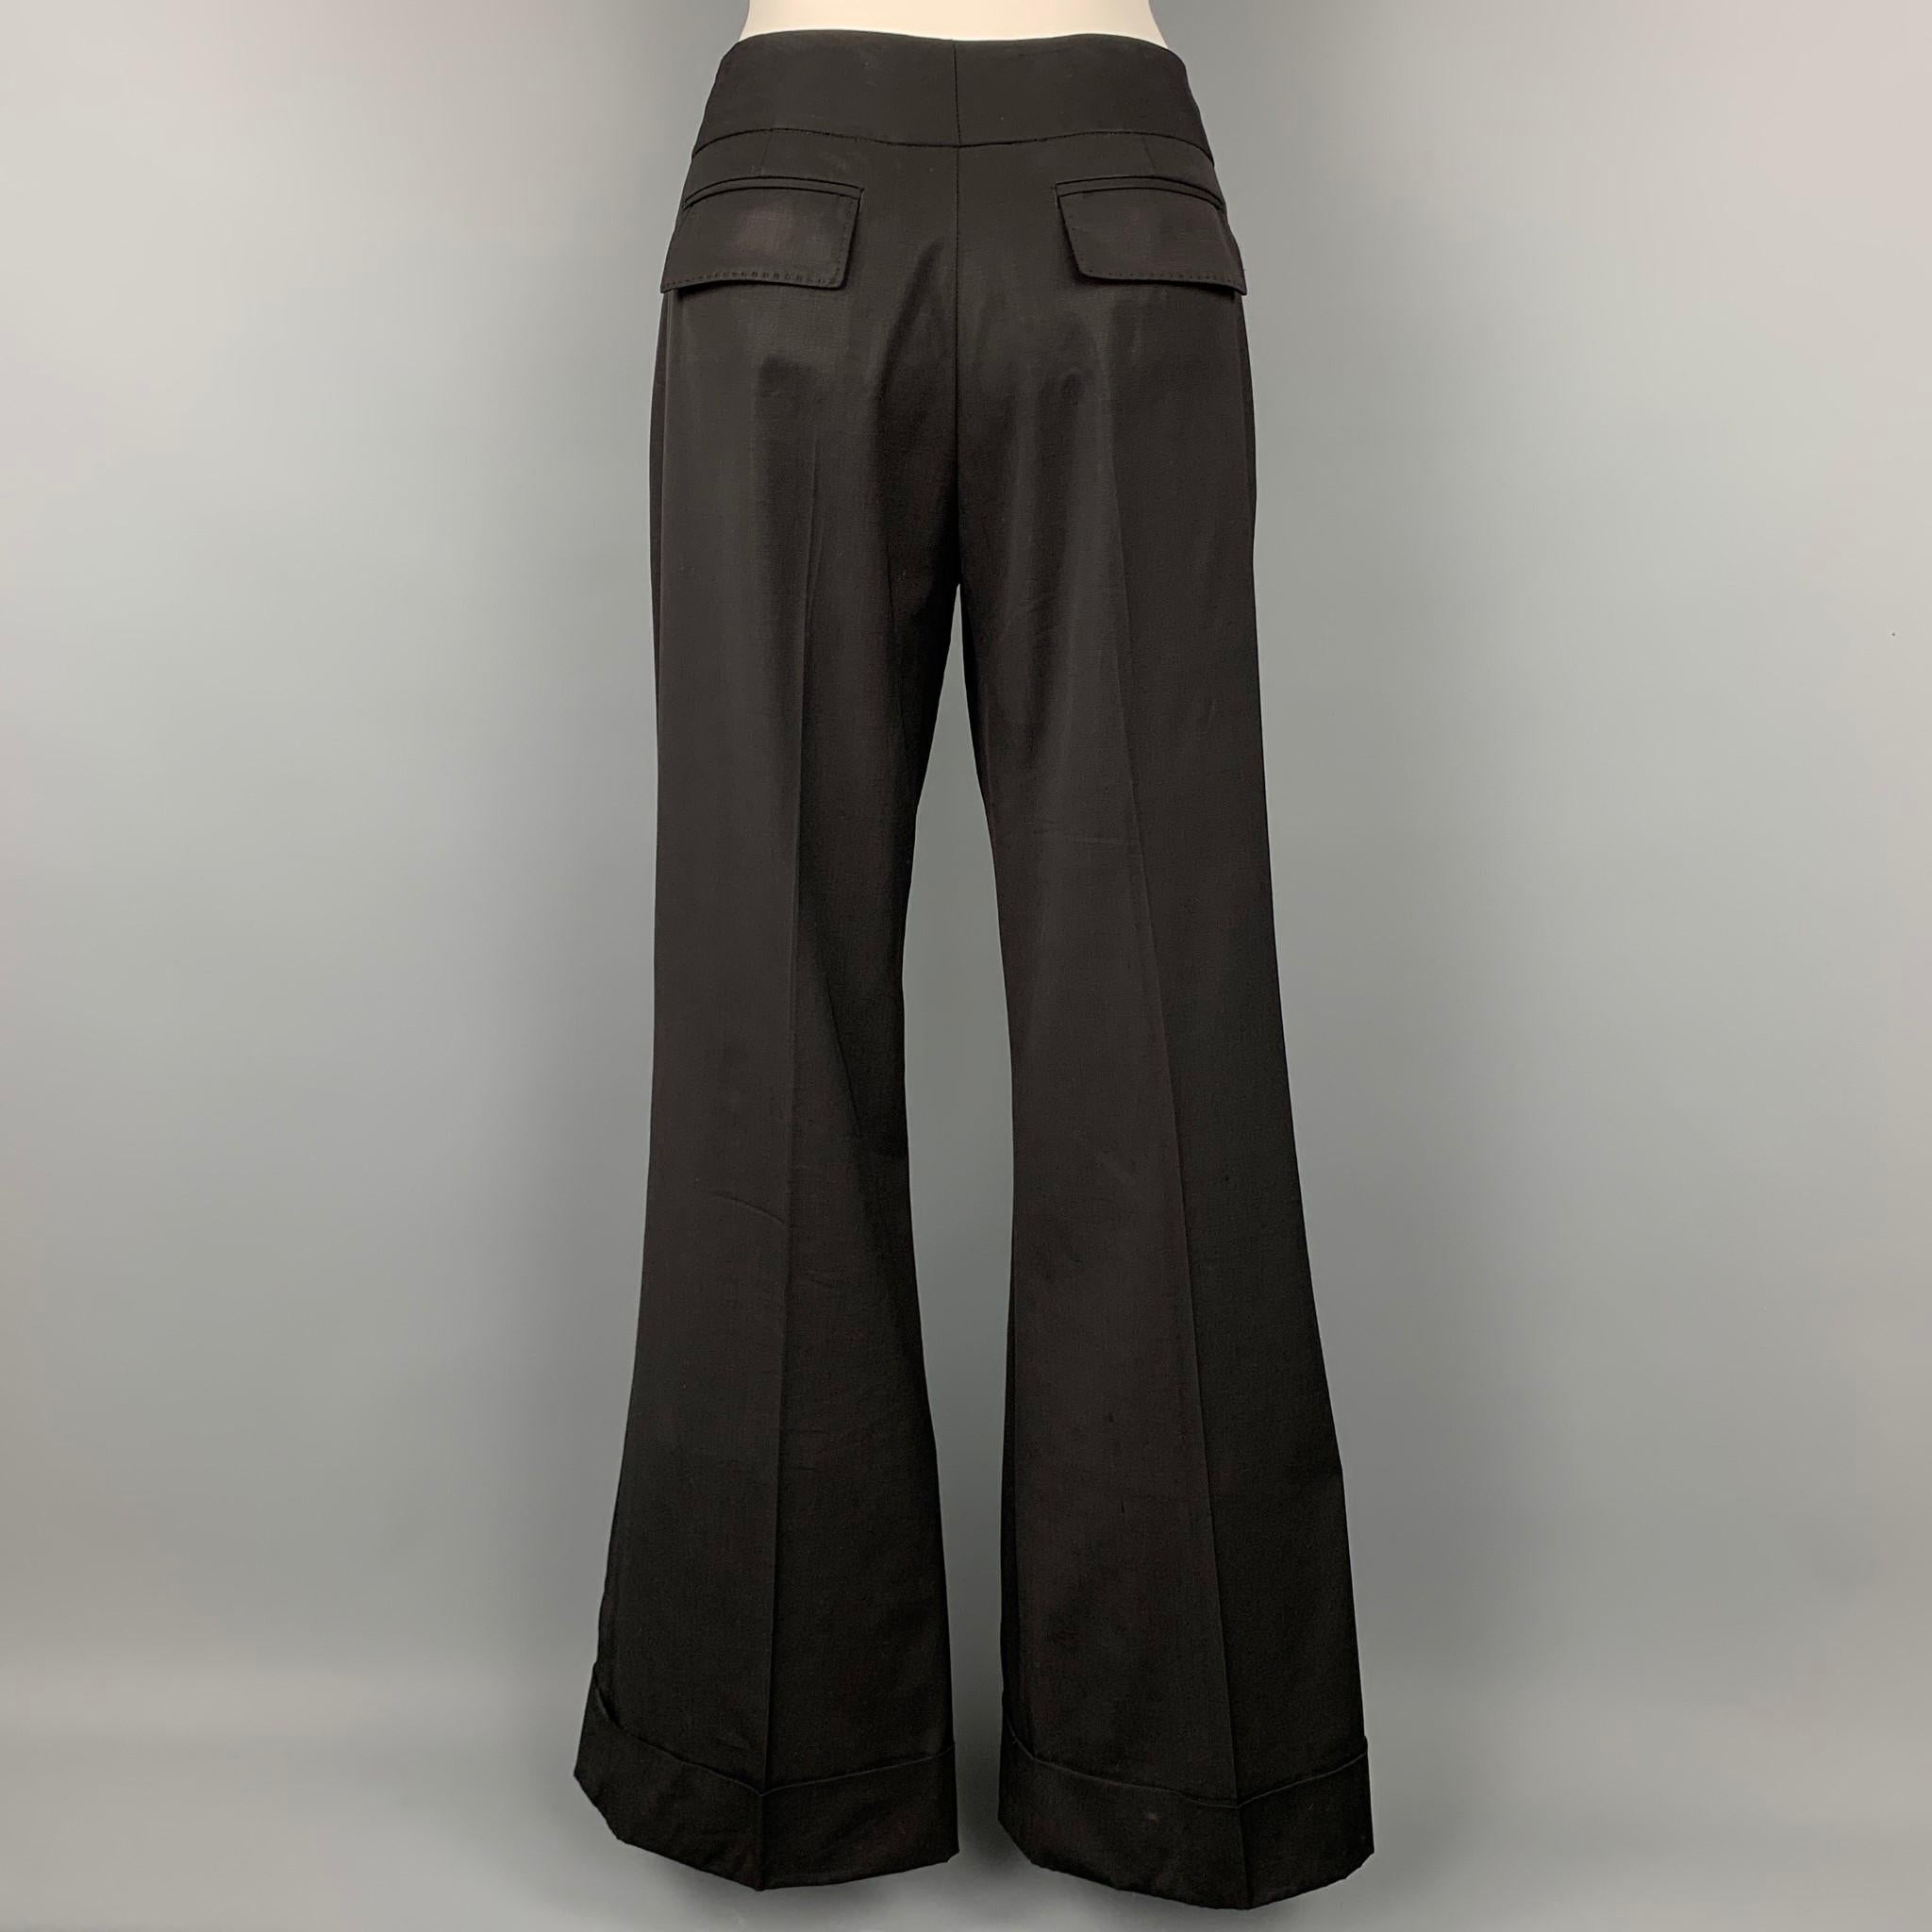 KAUFMAN FRANCO dress pants comes in a black wool featuring a wide leg style, slit pockets, front tab, and a zip fly closure. 

Very Good Pre-Owned Condition.
Marked: No size marked

Measurements:

Waist: 32 in.
Rise: 10 in.
Inseam: 34 in. 